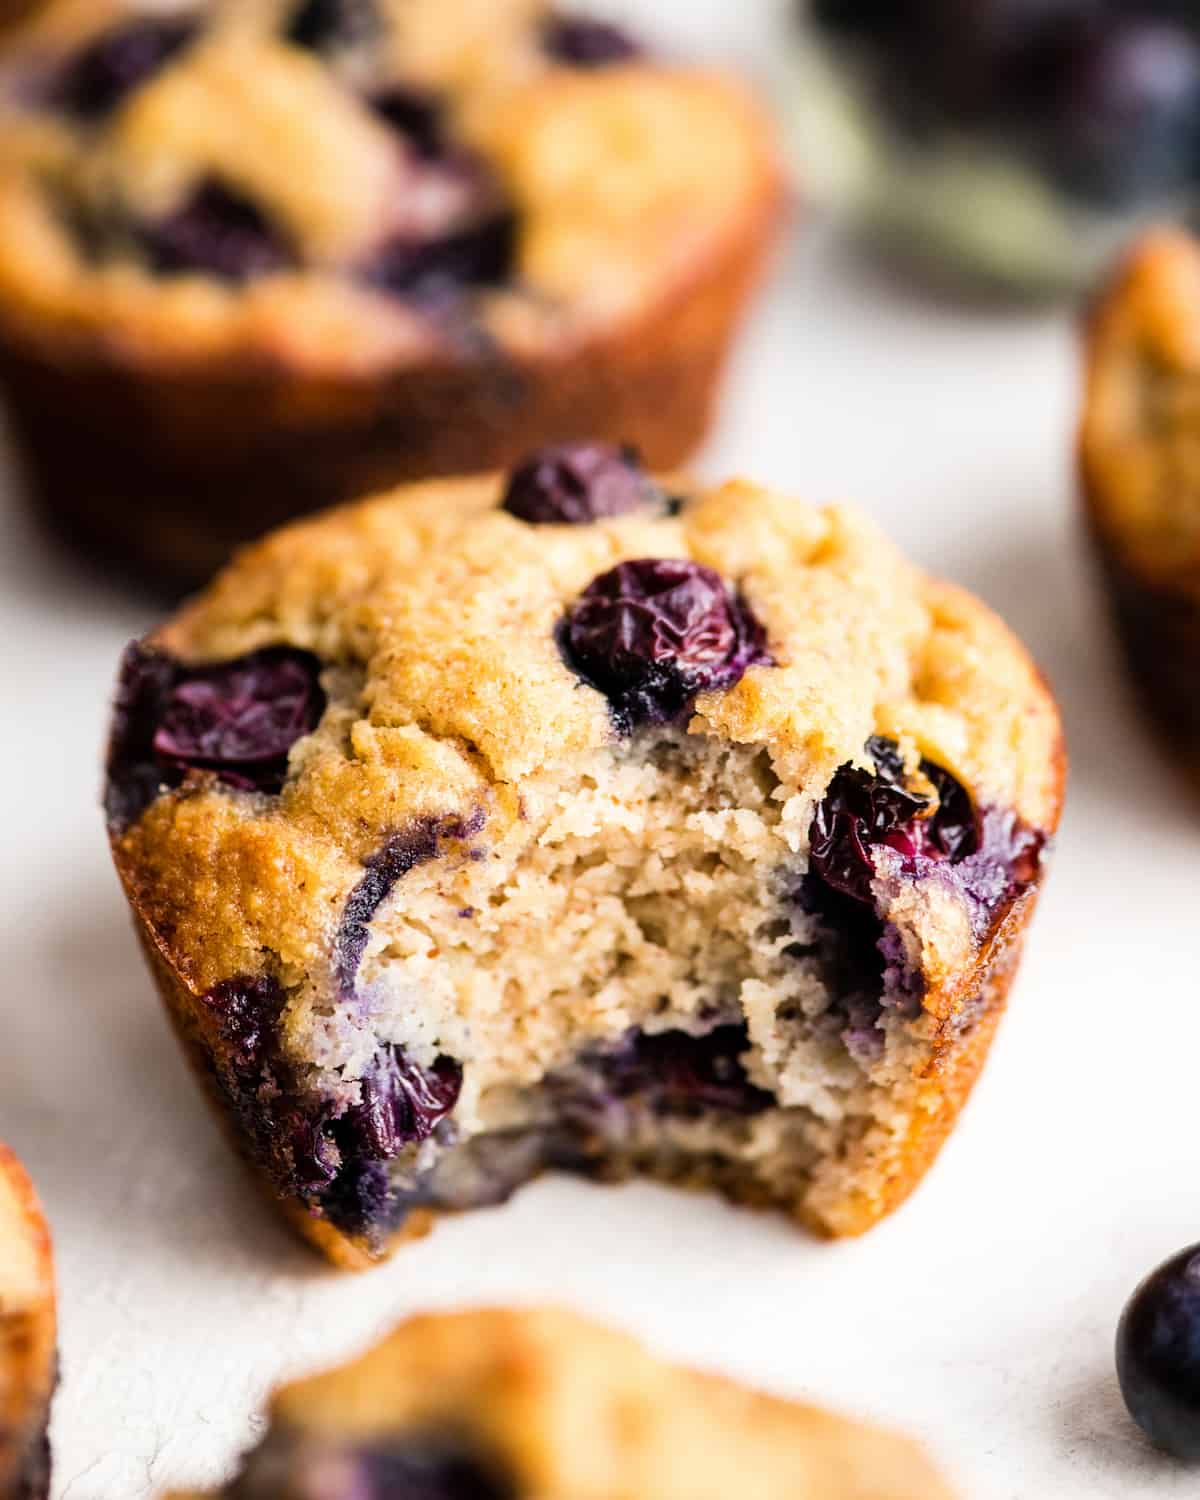 a paleo blueberry muffin with a bite taken out of it surrounded by other muffins & berries